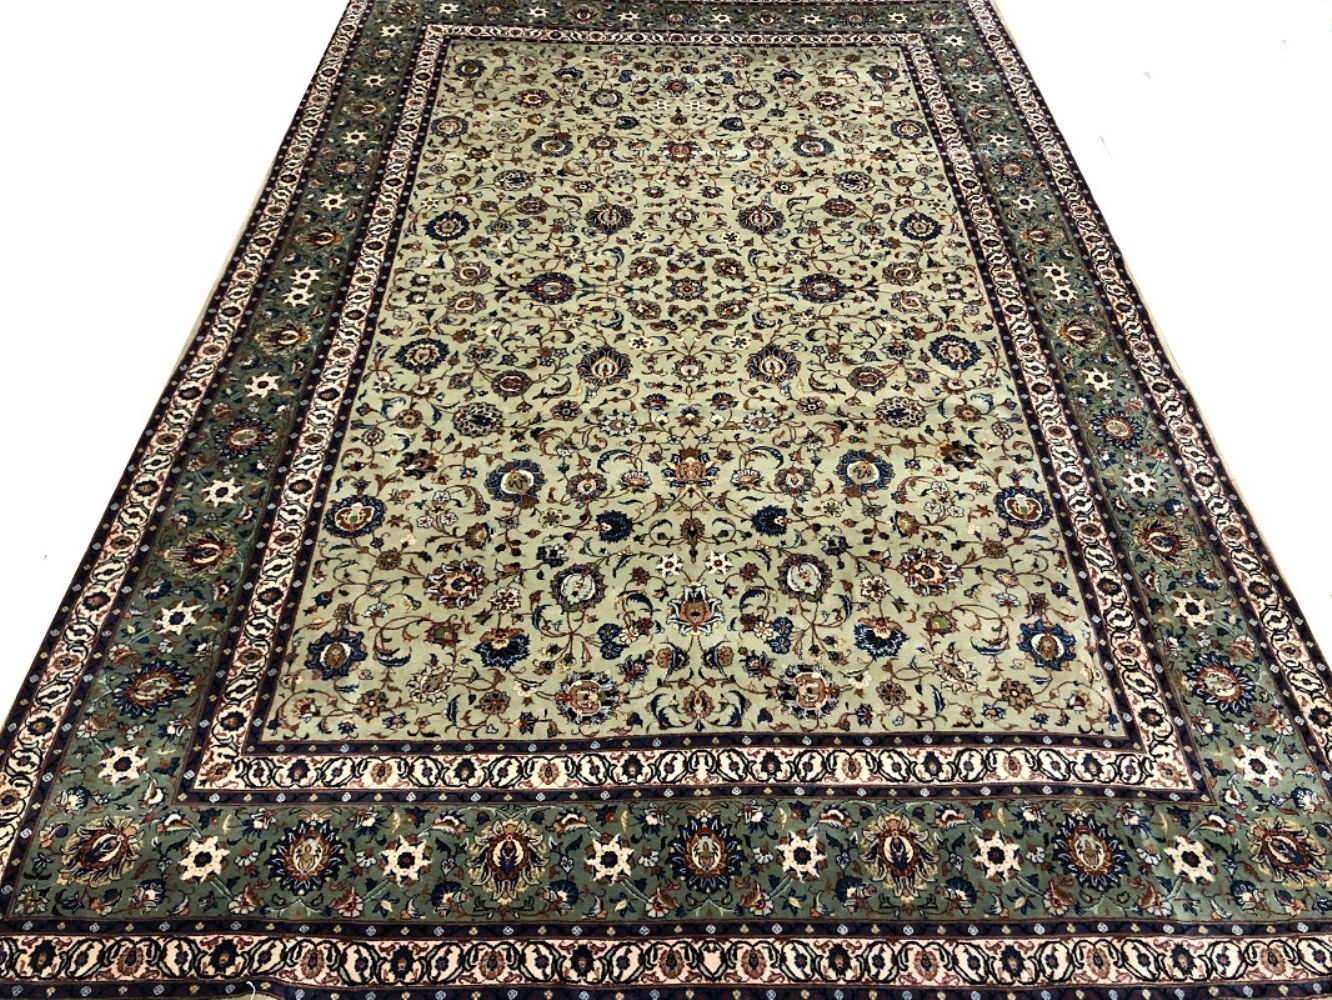 10x14 Aryana & Antique Revivals Hand Knotted Wool Area Rug - MR028357